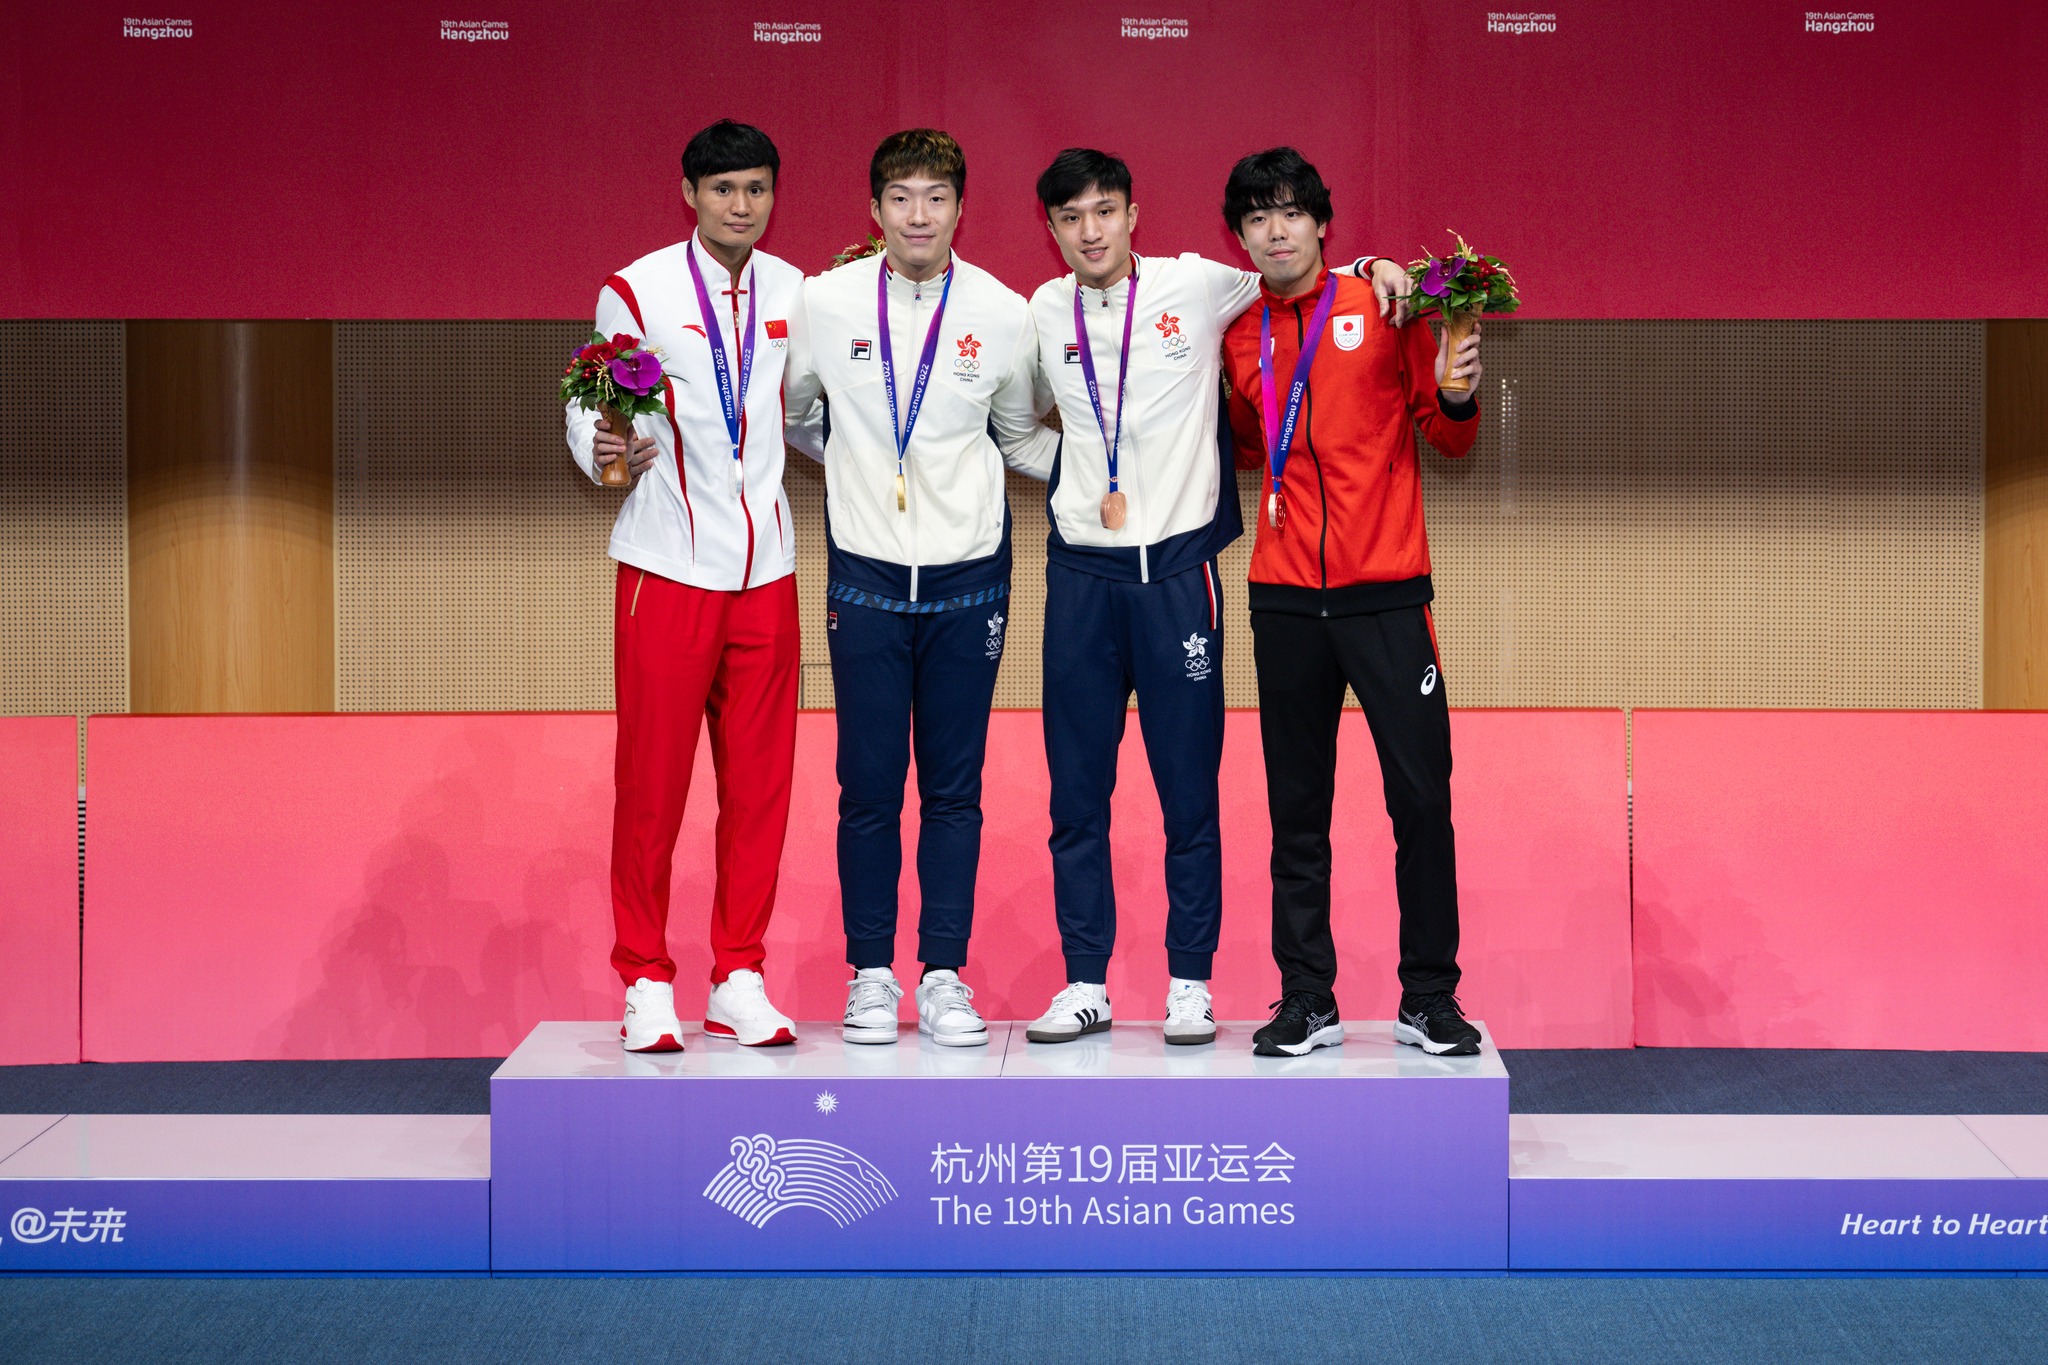 Fencer Cheung Ka-long (2nd L) wins a gold medal in Men's Foil Individual, while his teammate Ryan Choi (2nd R) bags a bronze medal.